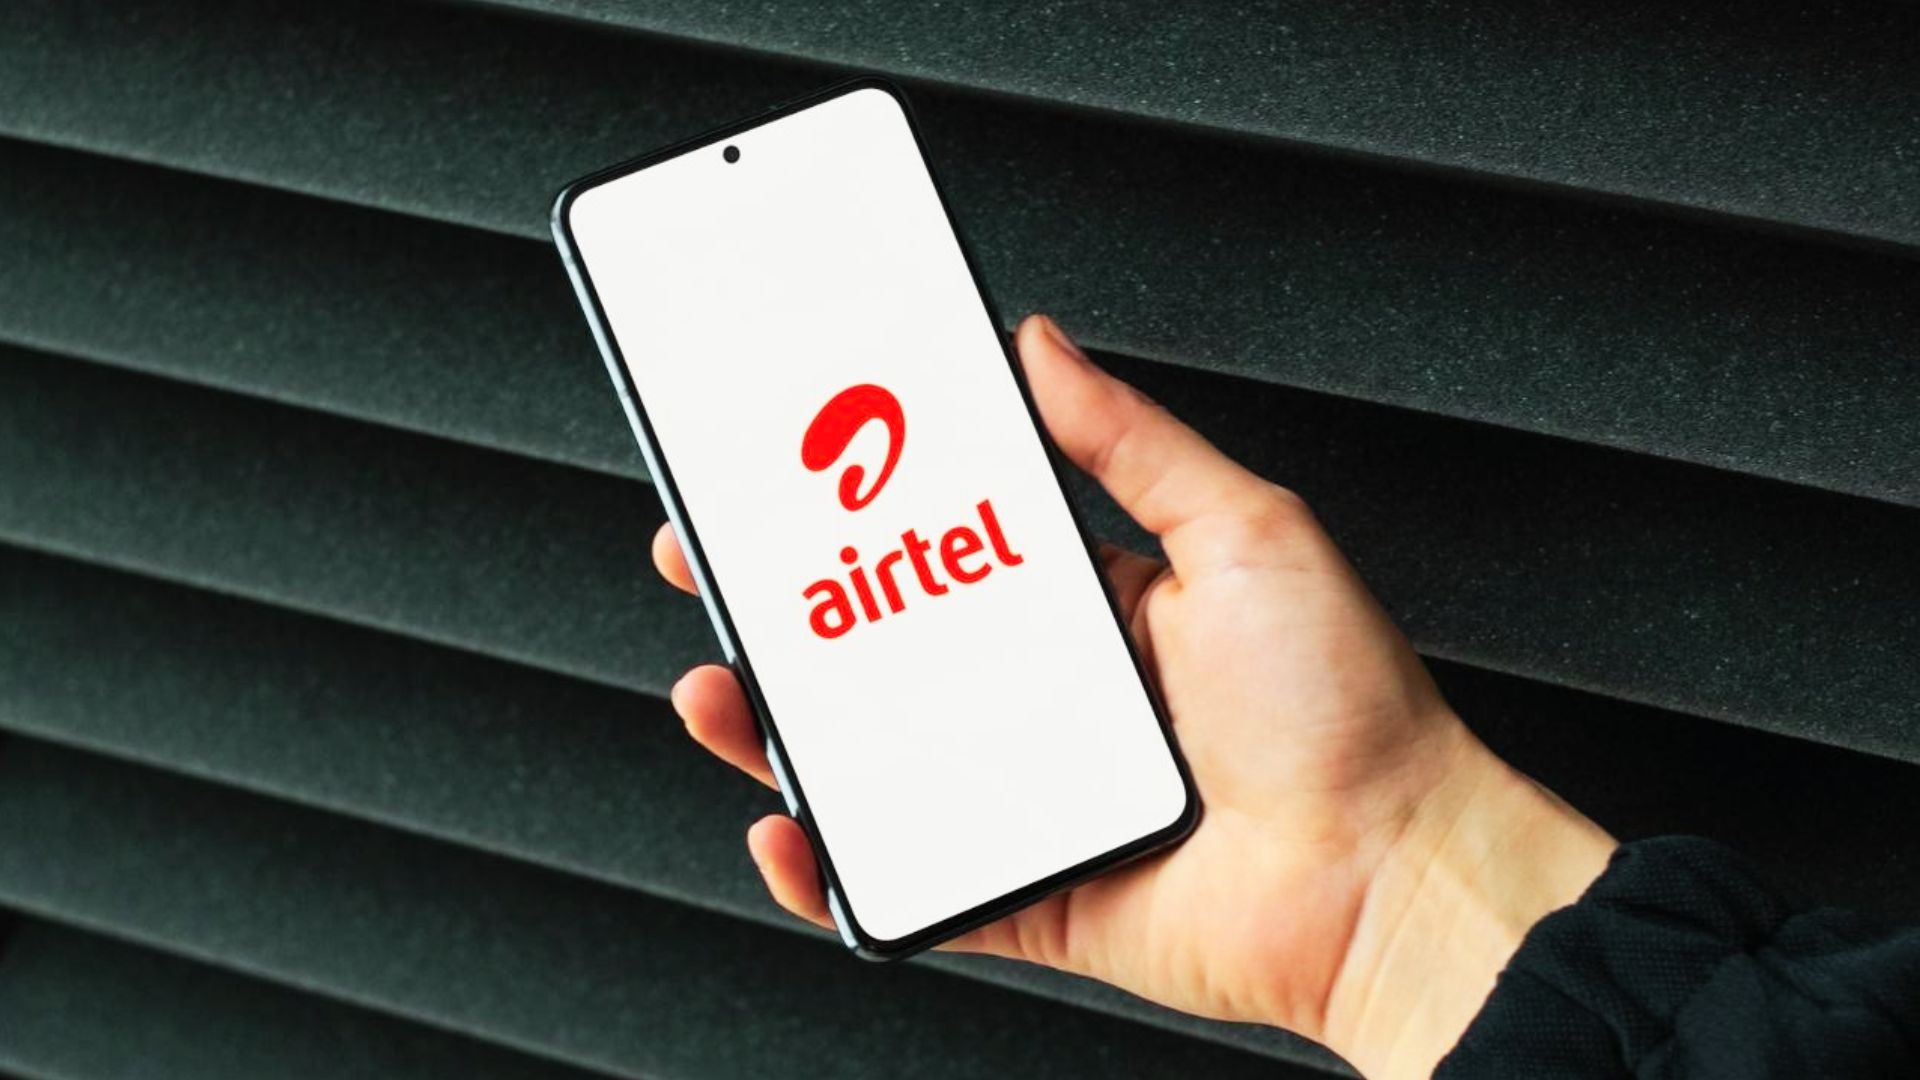 How to Check Airtel Number in Mobile? 7 Great Ways